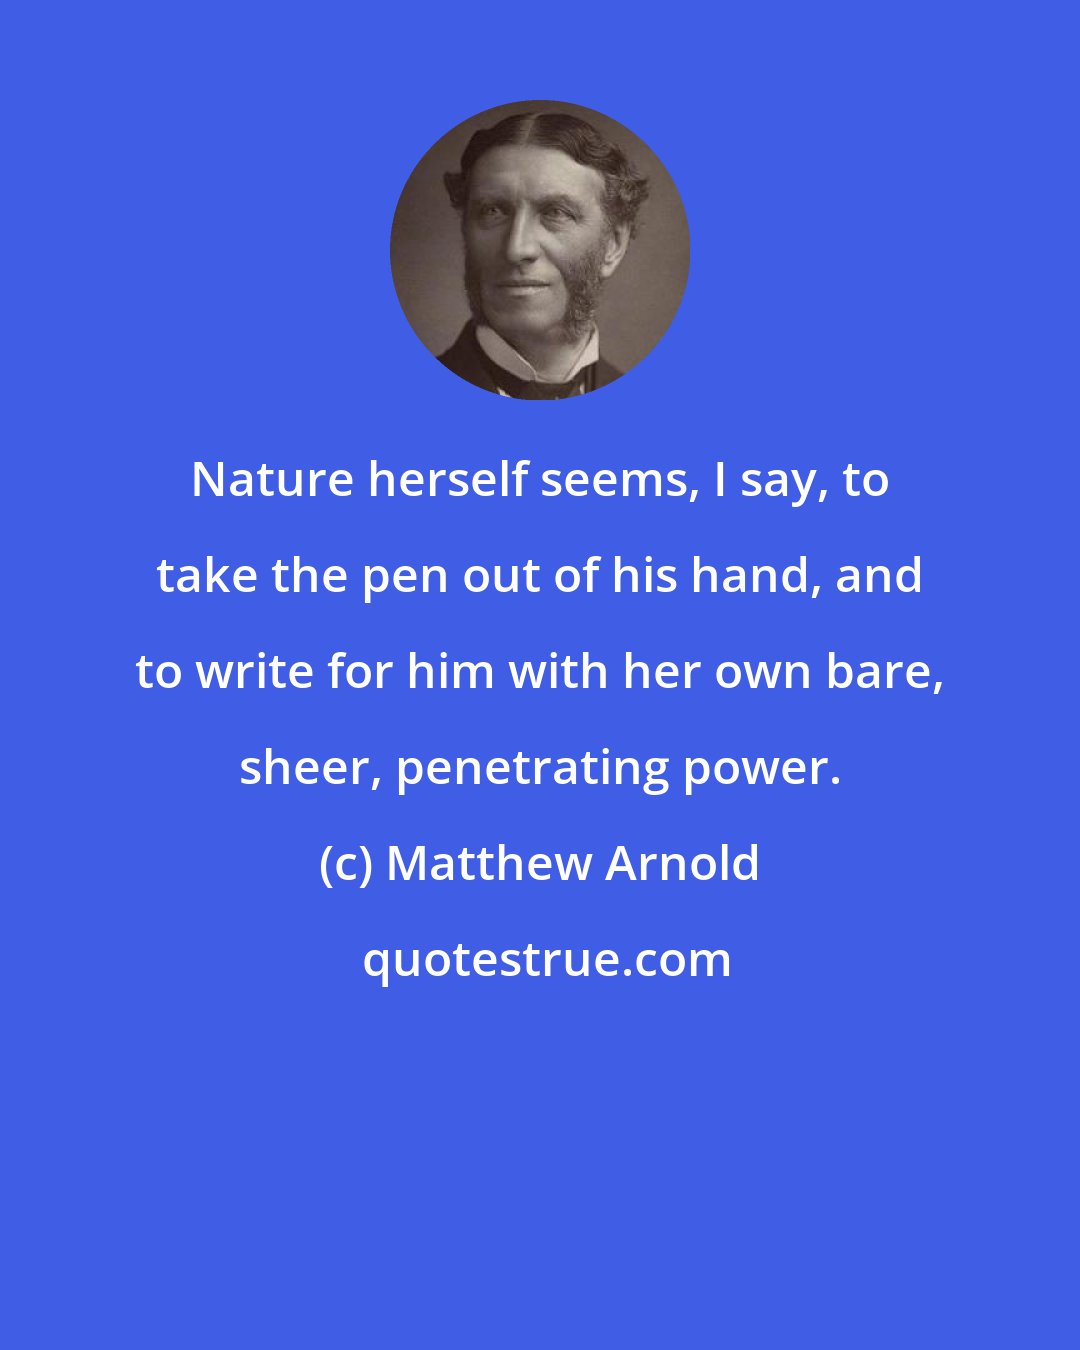 Matthew Arnold: Nature herself seems, I say, to take the pen out of his hand, and to write for him with her own bare, sheer, penetrating power.